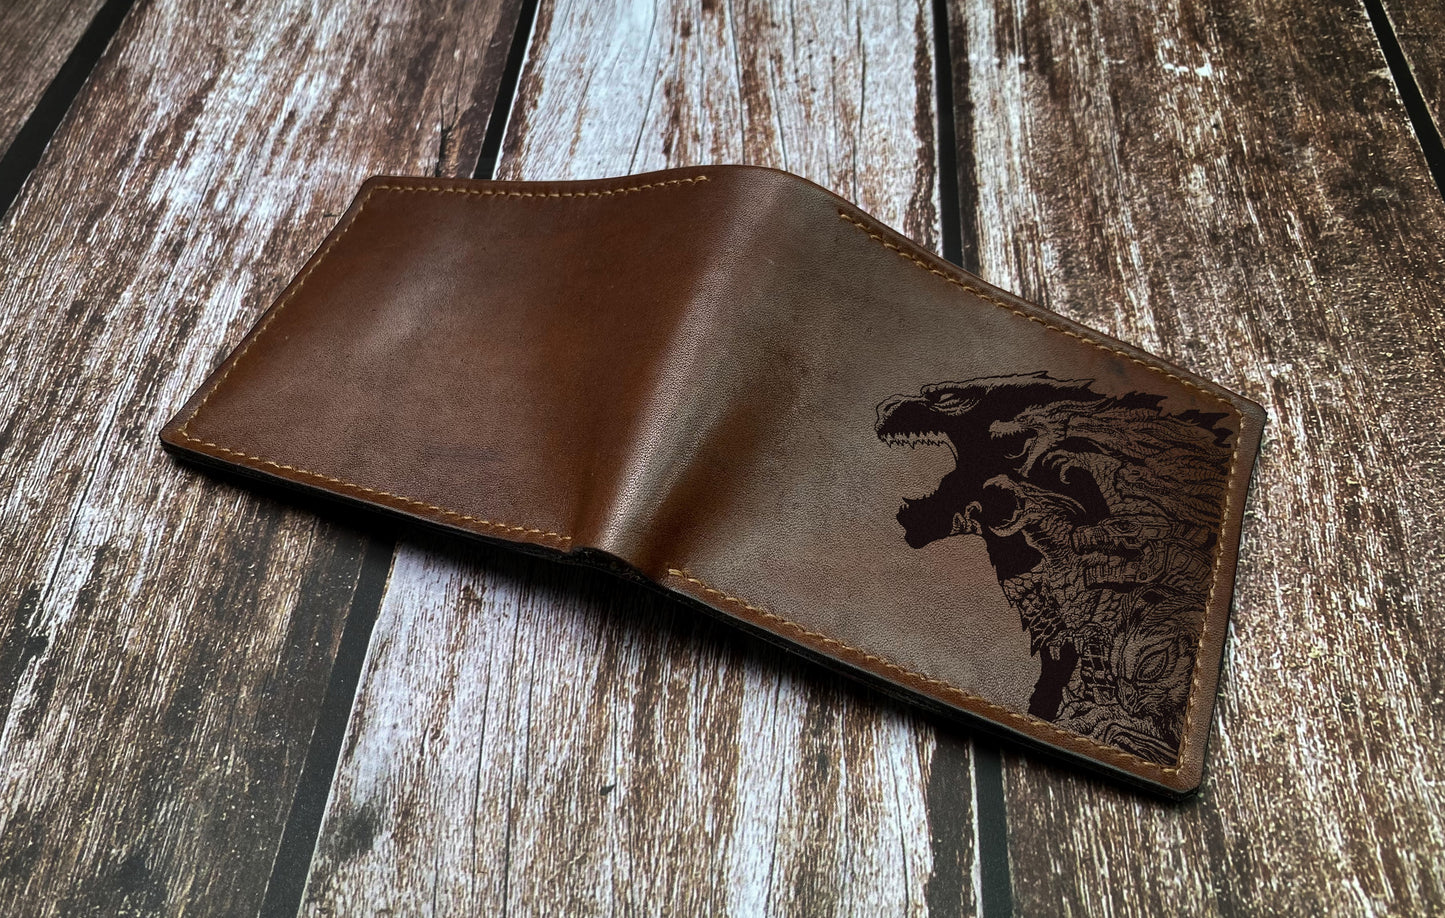 Godzilla king of the monsters leather handmade wallet, bifold ID card wallet for him